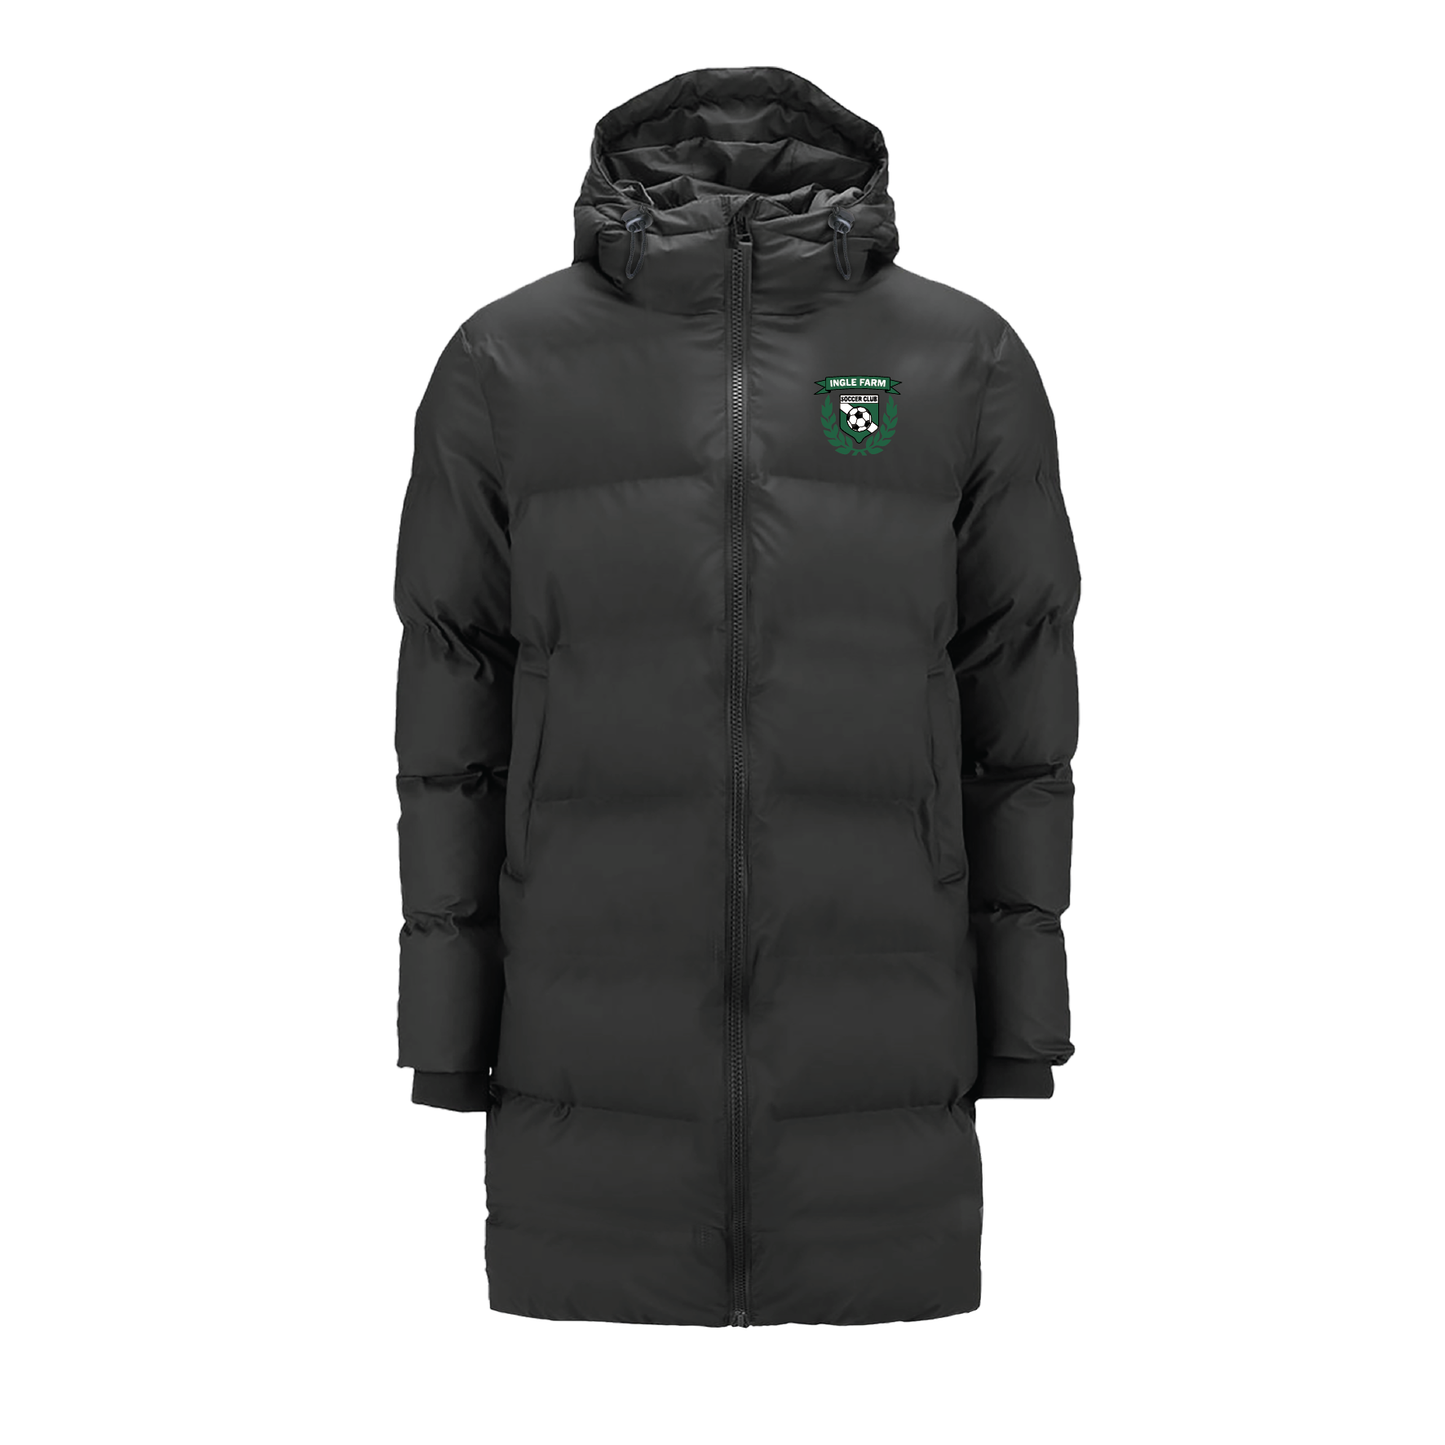 INGLE FARM SOCCER CLUB PUFFER JACKET (ALLOW 1-2 WEEKS FOR DELIVERY)